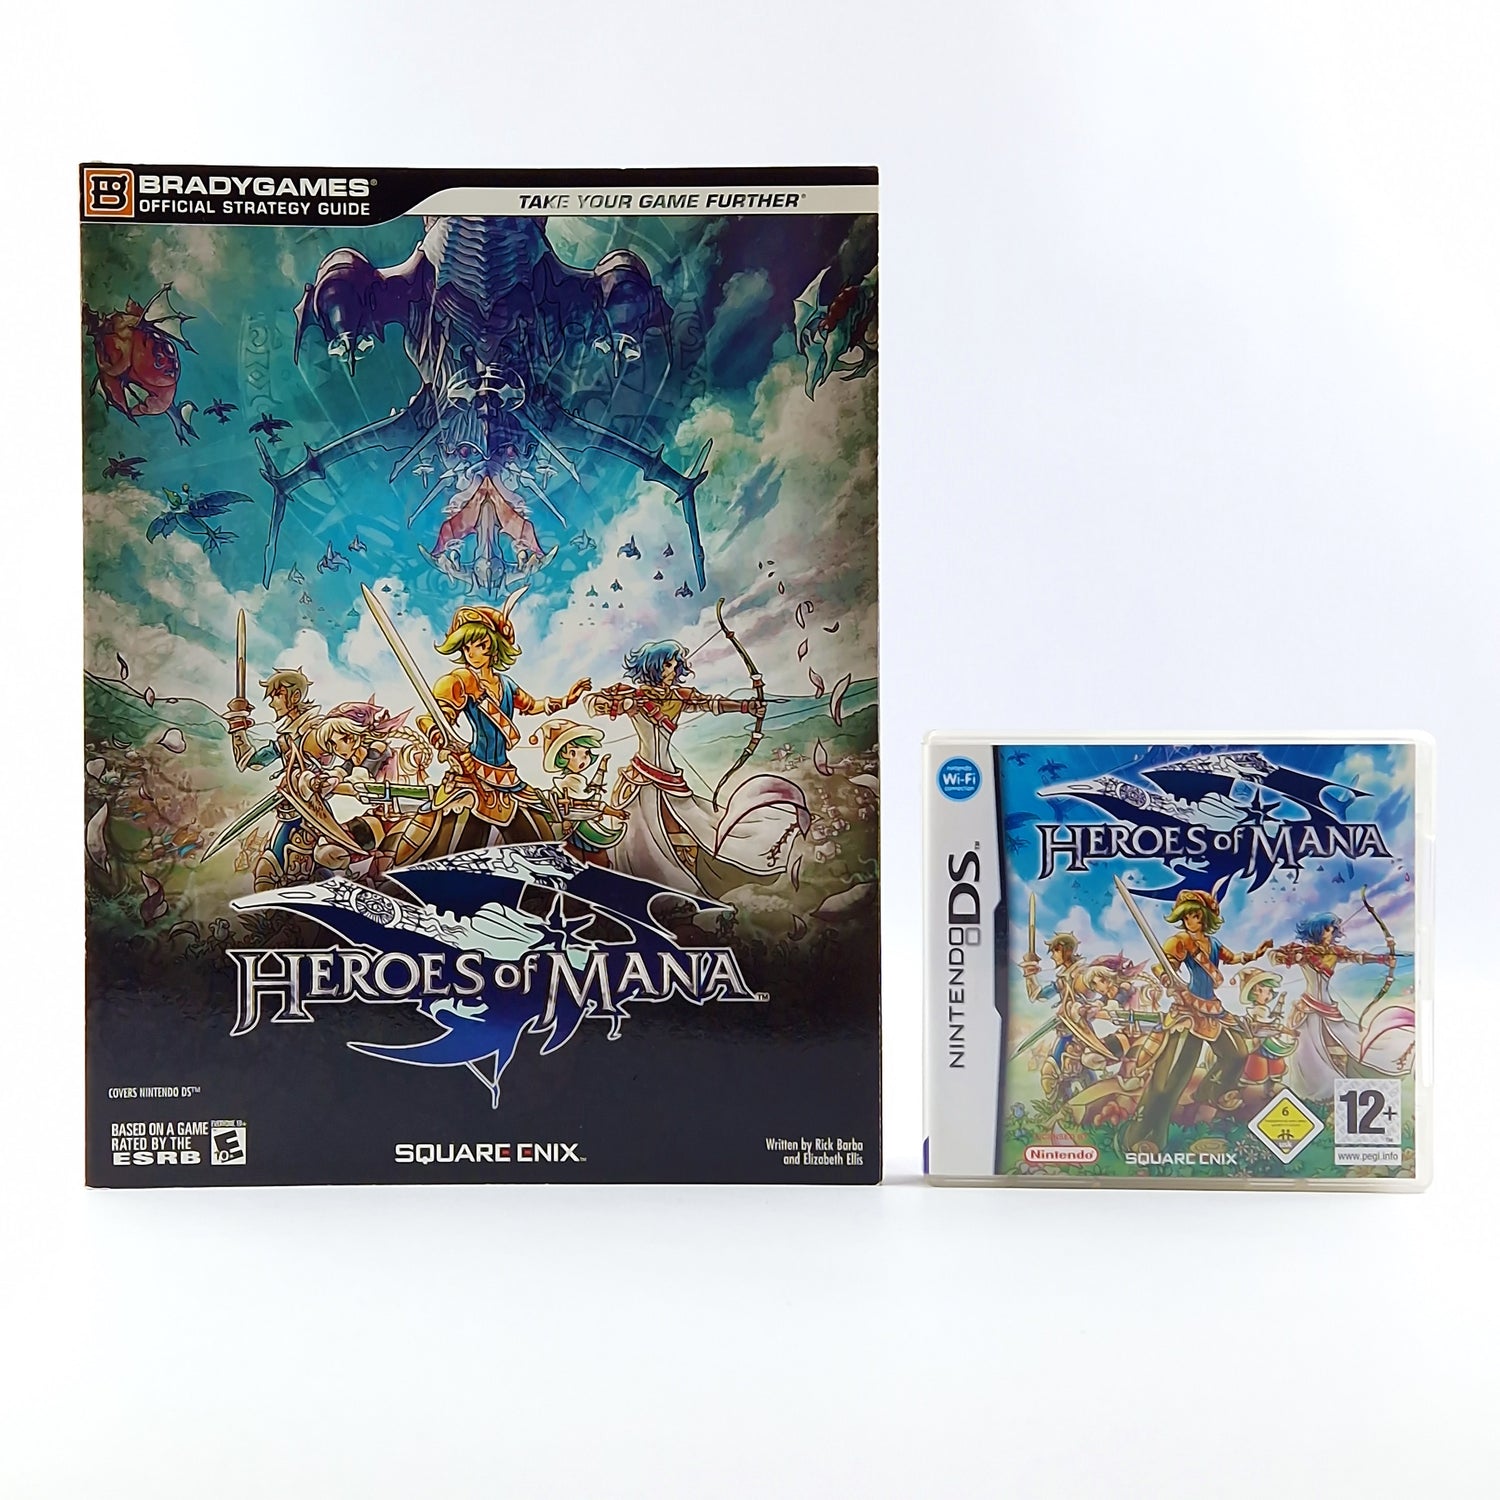 Nintendo DS Game: Heroes of Mana + Bradygames Guide Square Enix